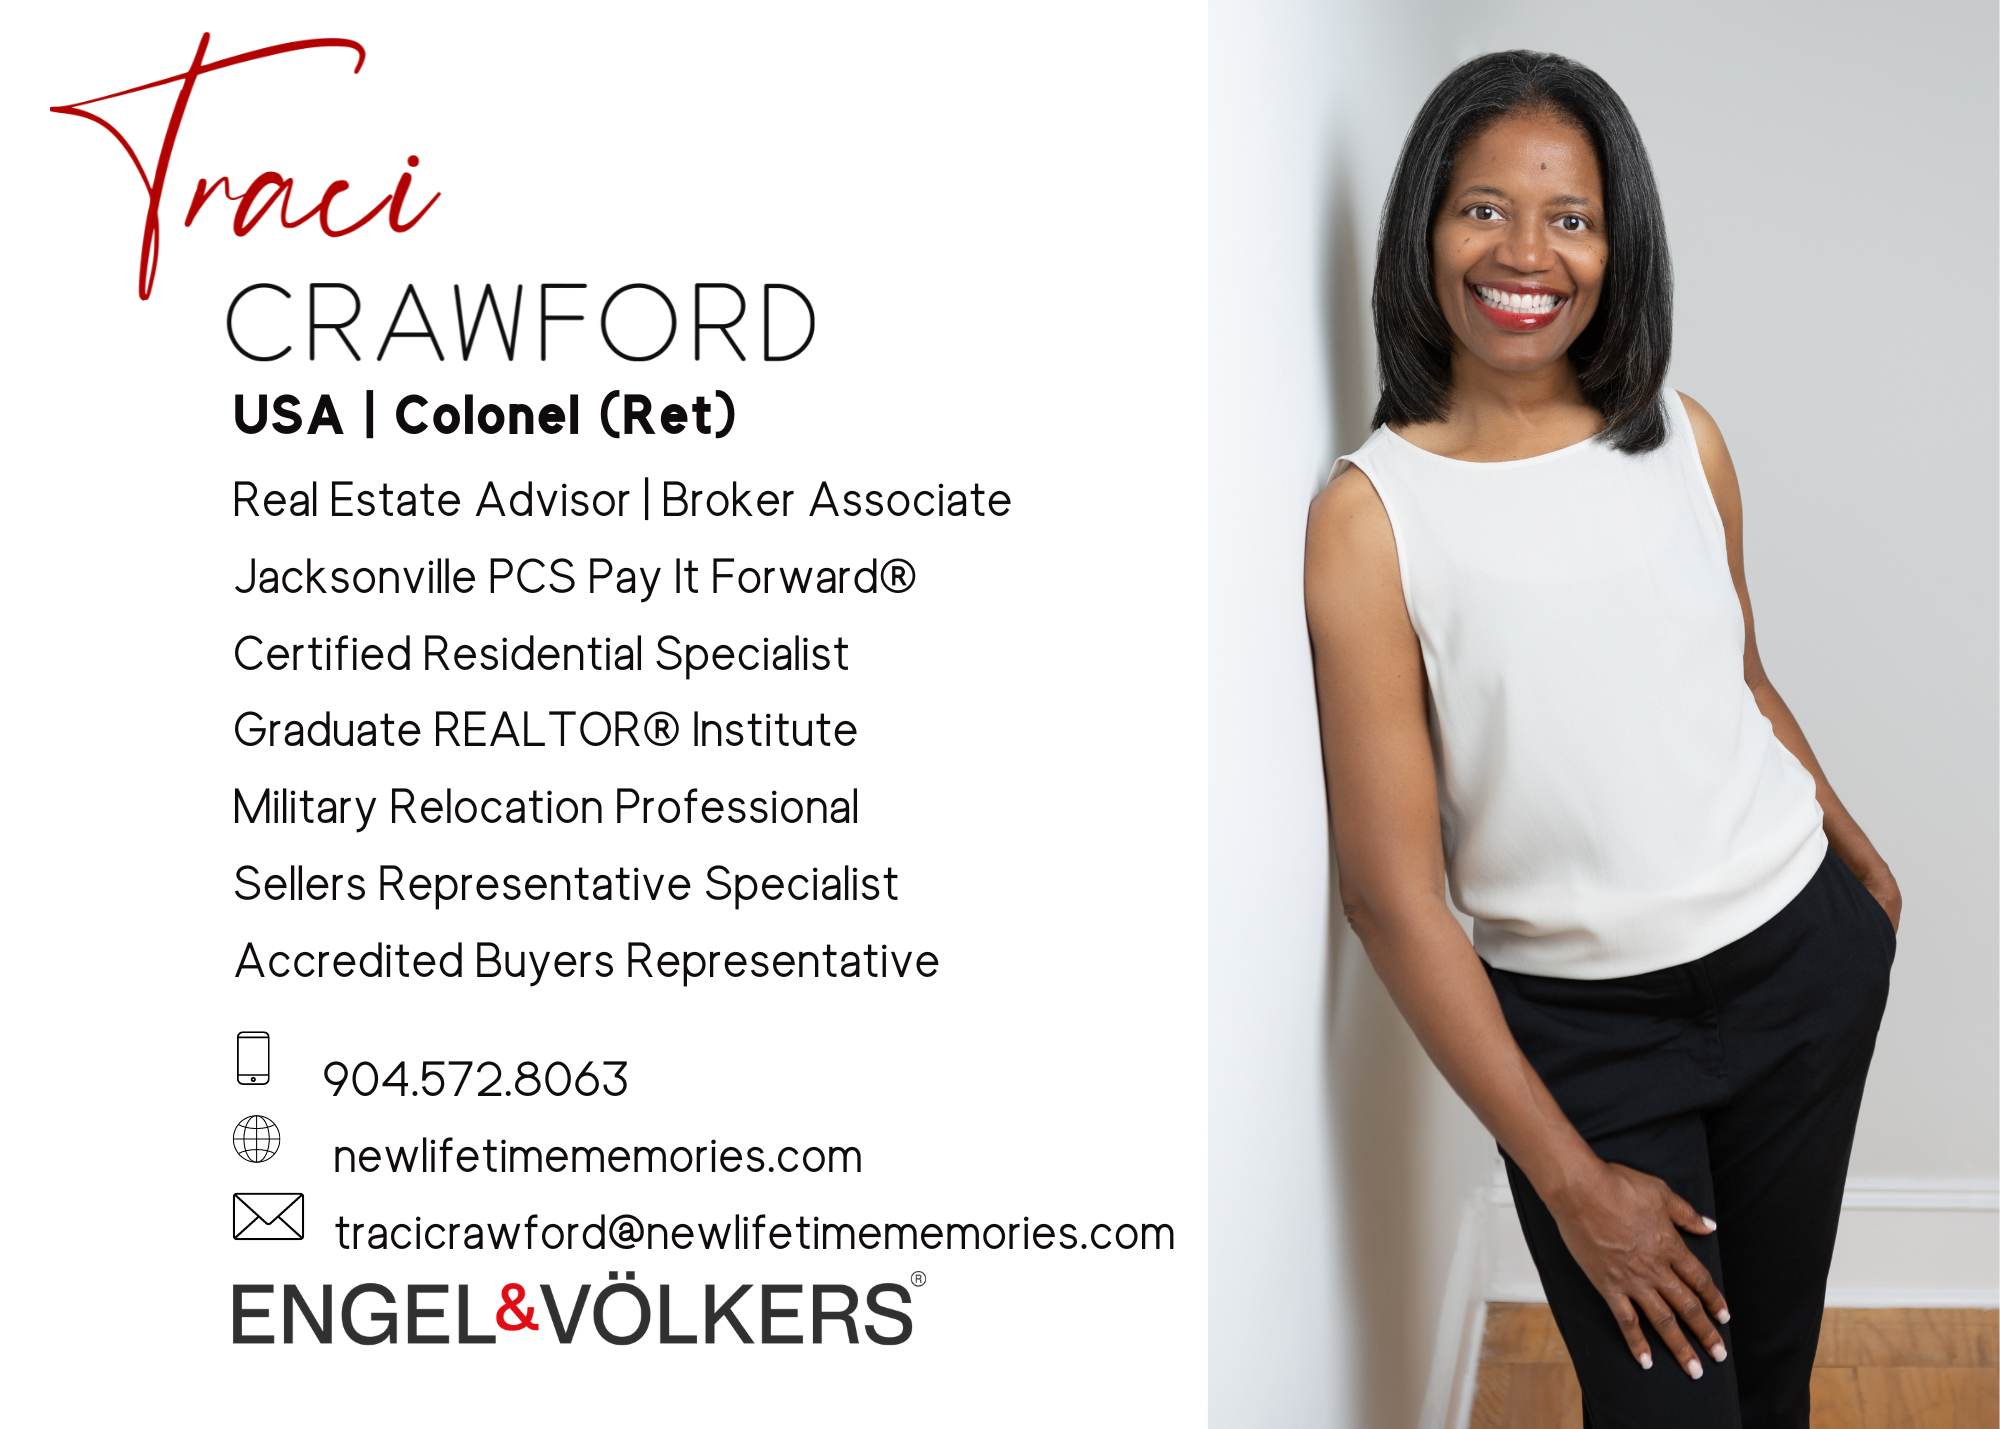 Traci Crawford, Top Real Estate Agent in Northeast Florida